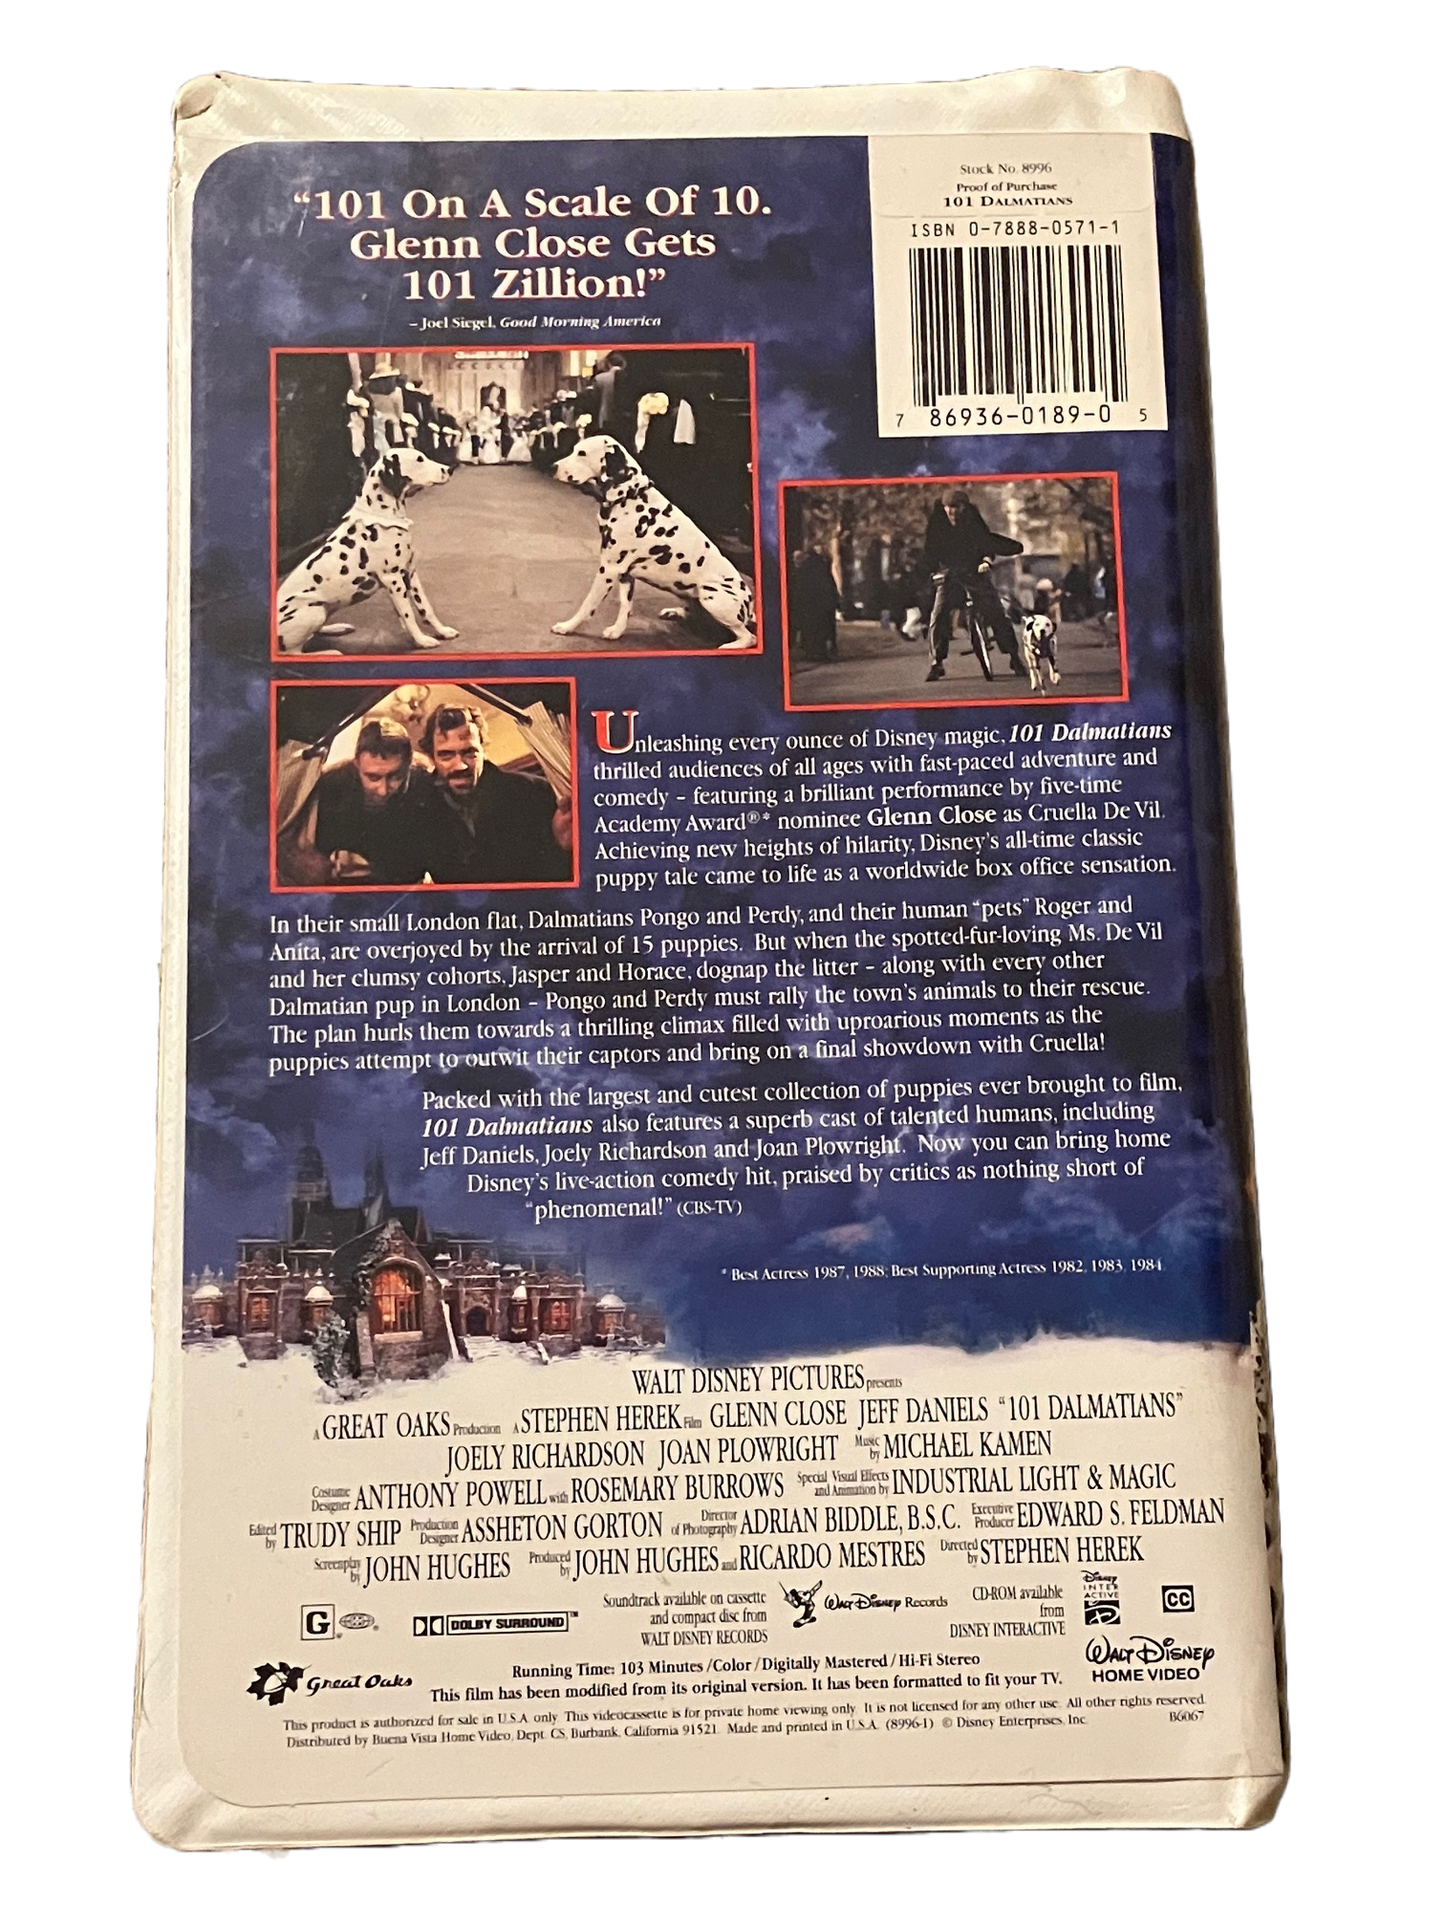 The Prince of Egypt NEW VHS Movie